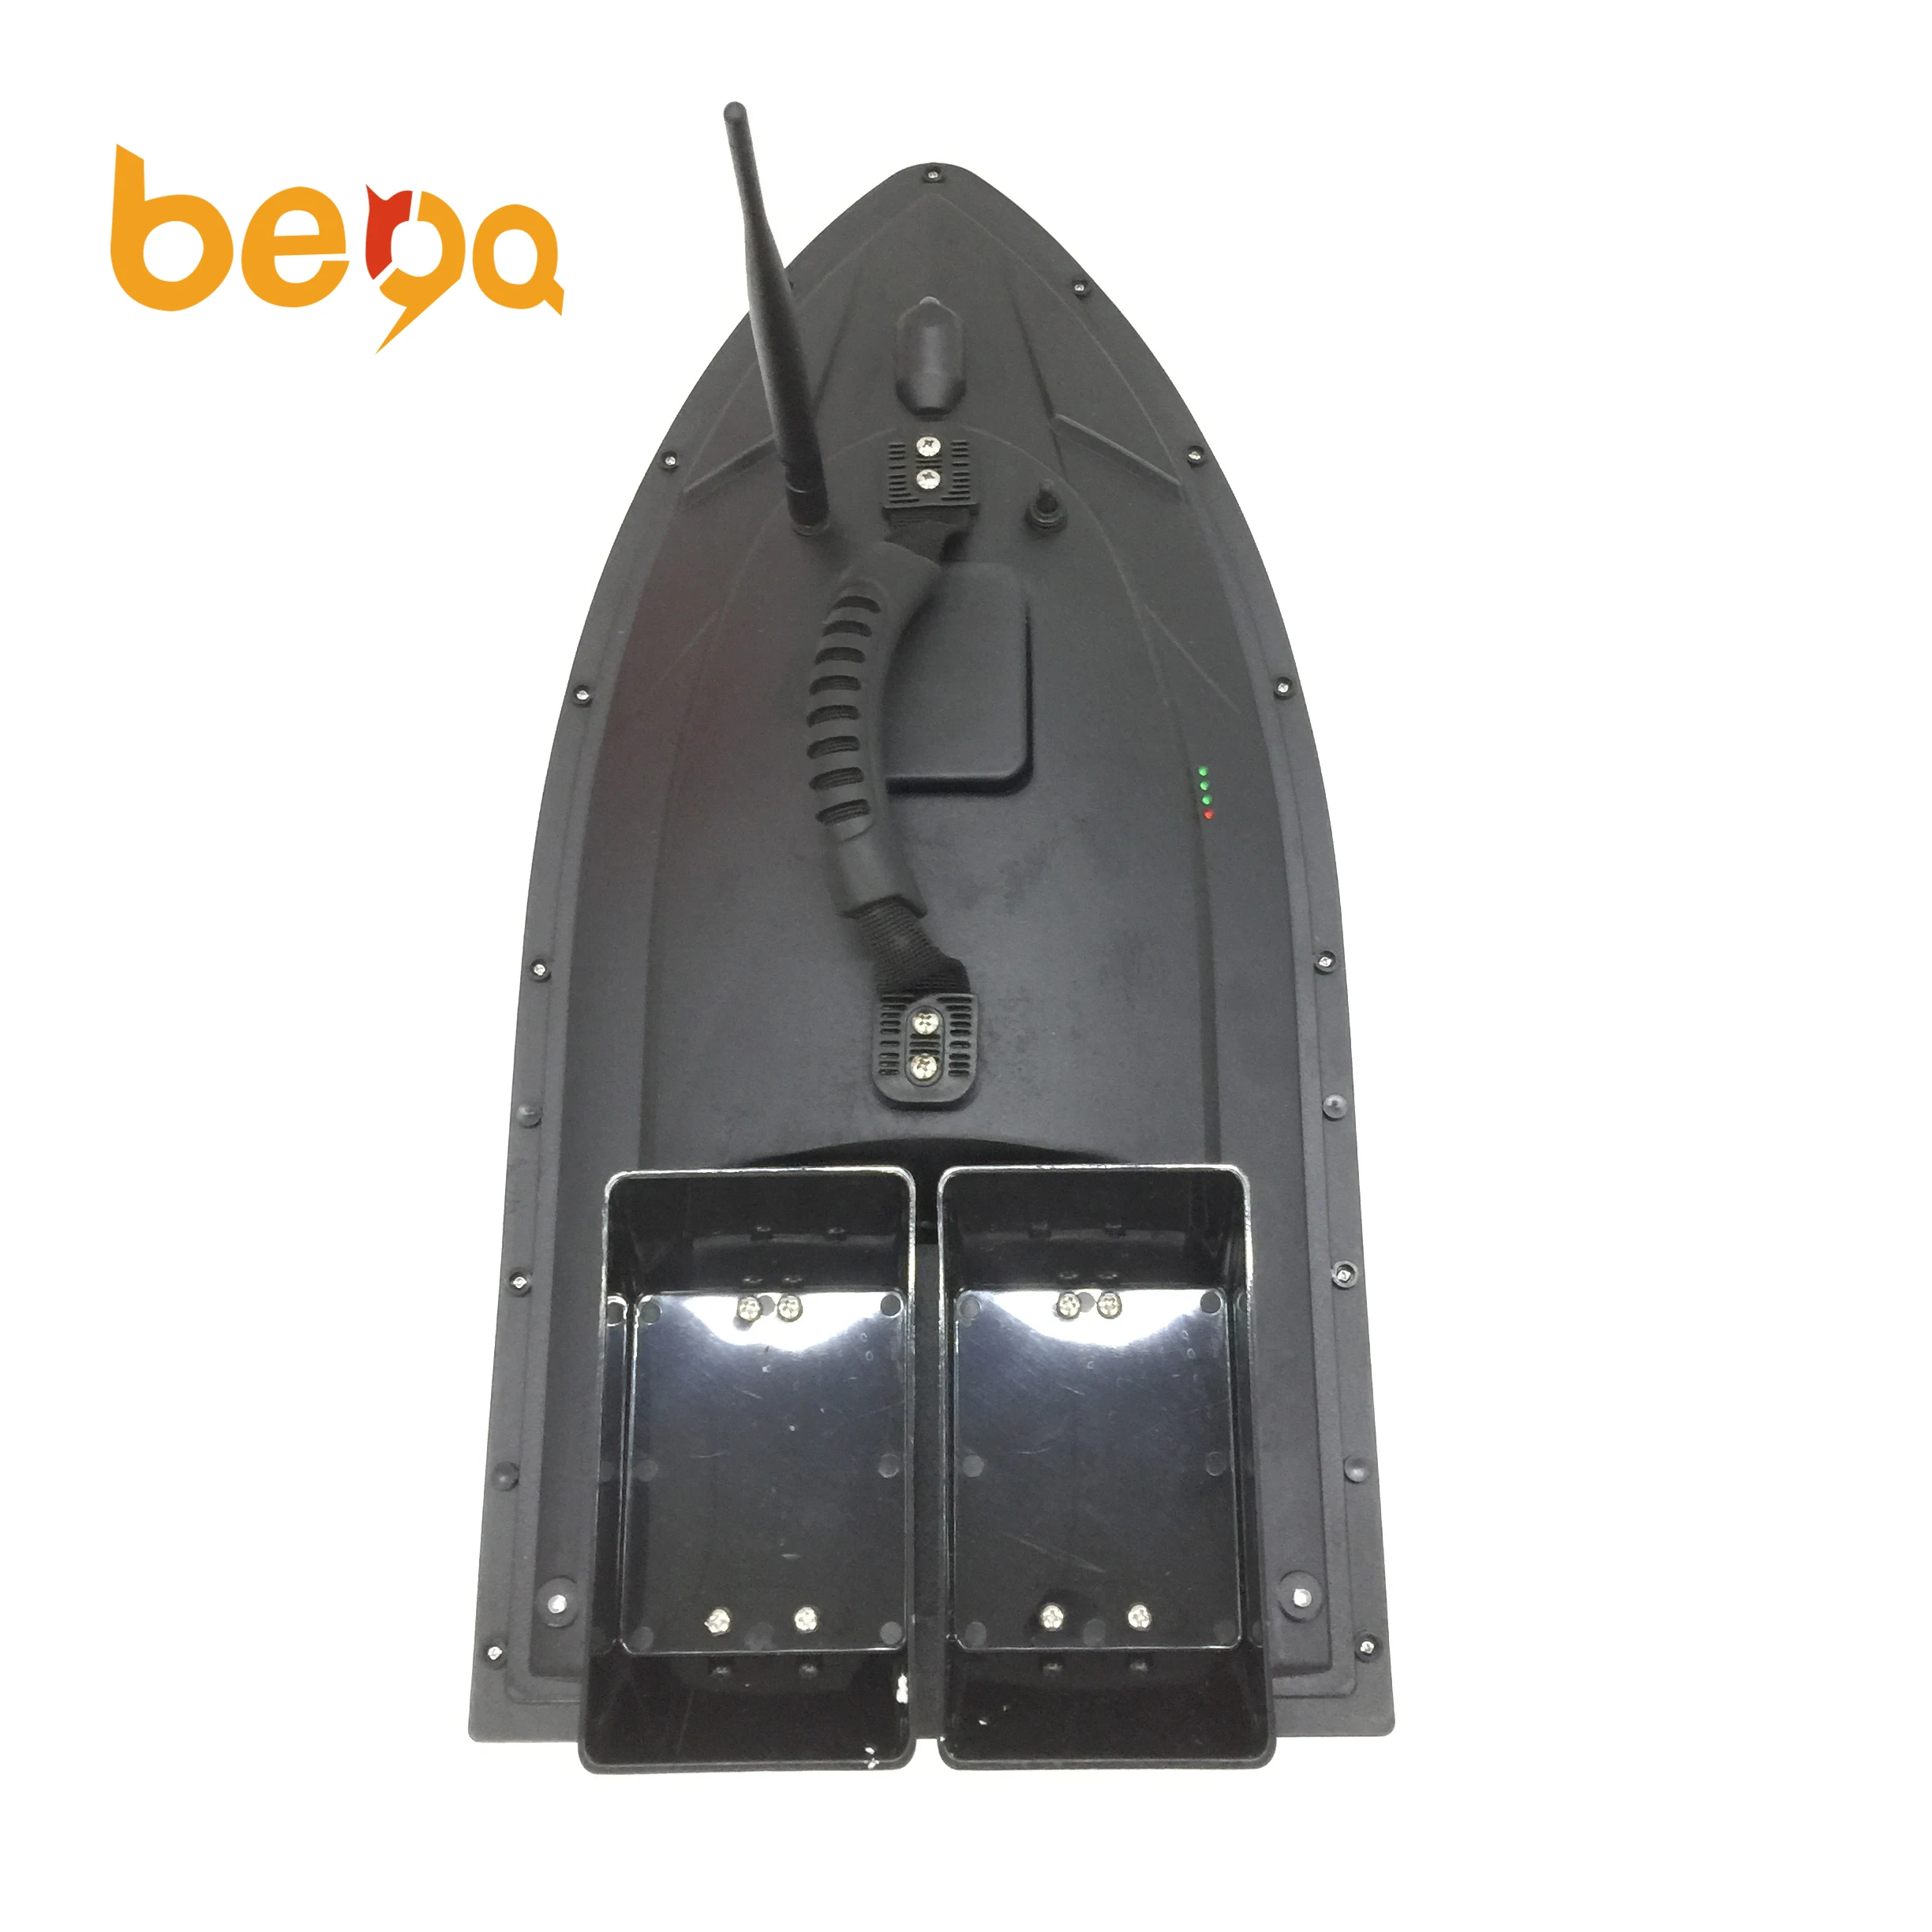 
RC Boat 500m Remote Control Fishing Bait Boat 2motors Nesting boat finder with 2bait hopper and night lights 